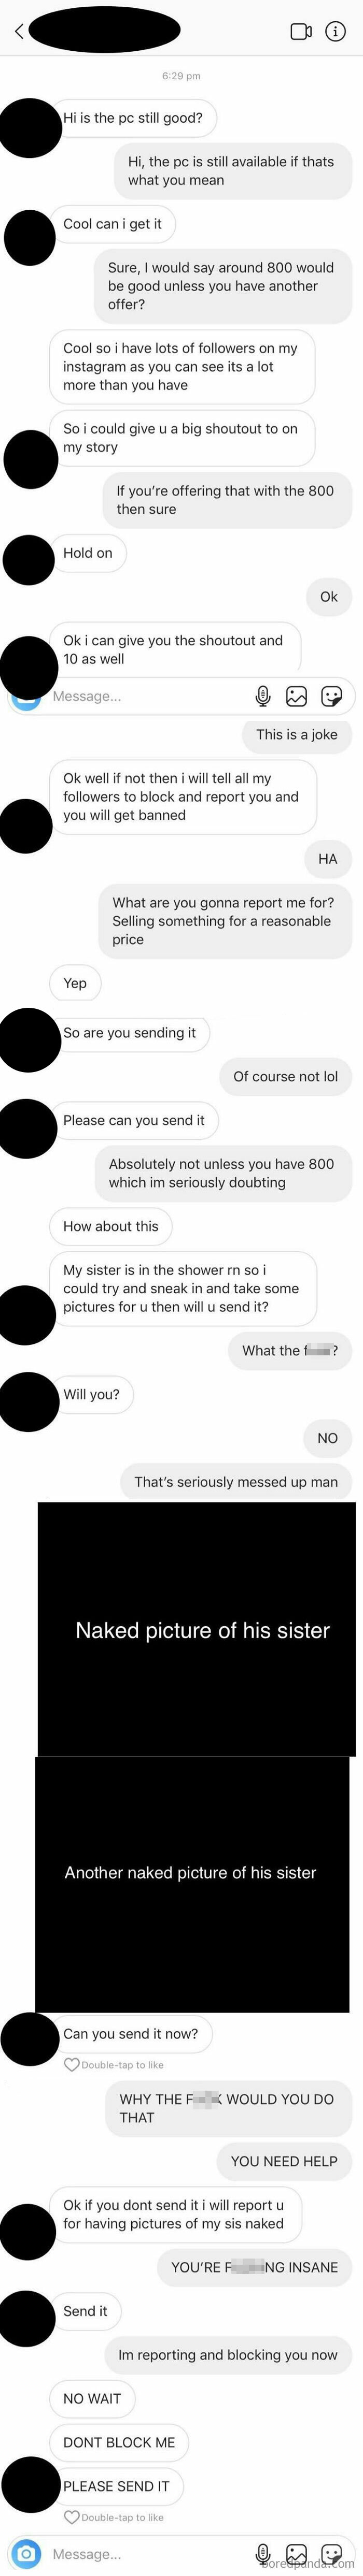 Kid (I Assume) Tries To Trade My Old PC For Nudes Of His Sister